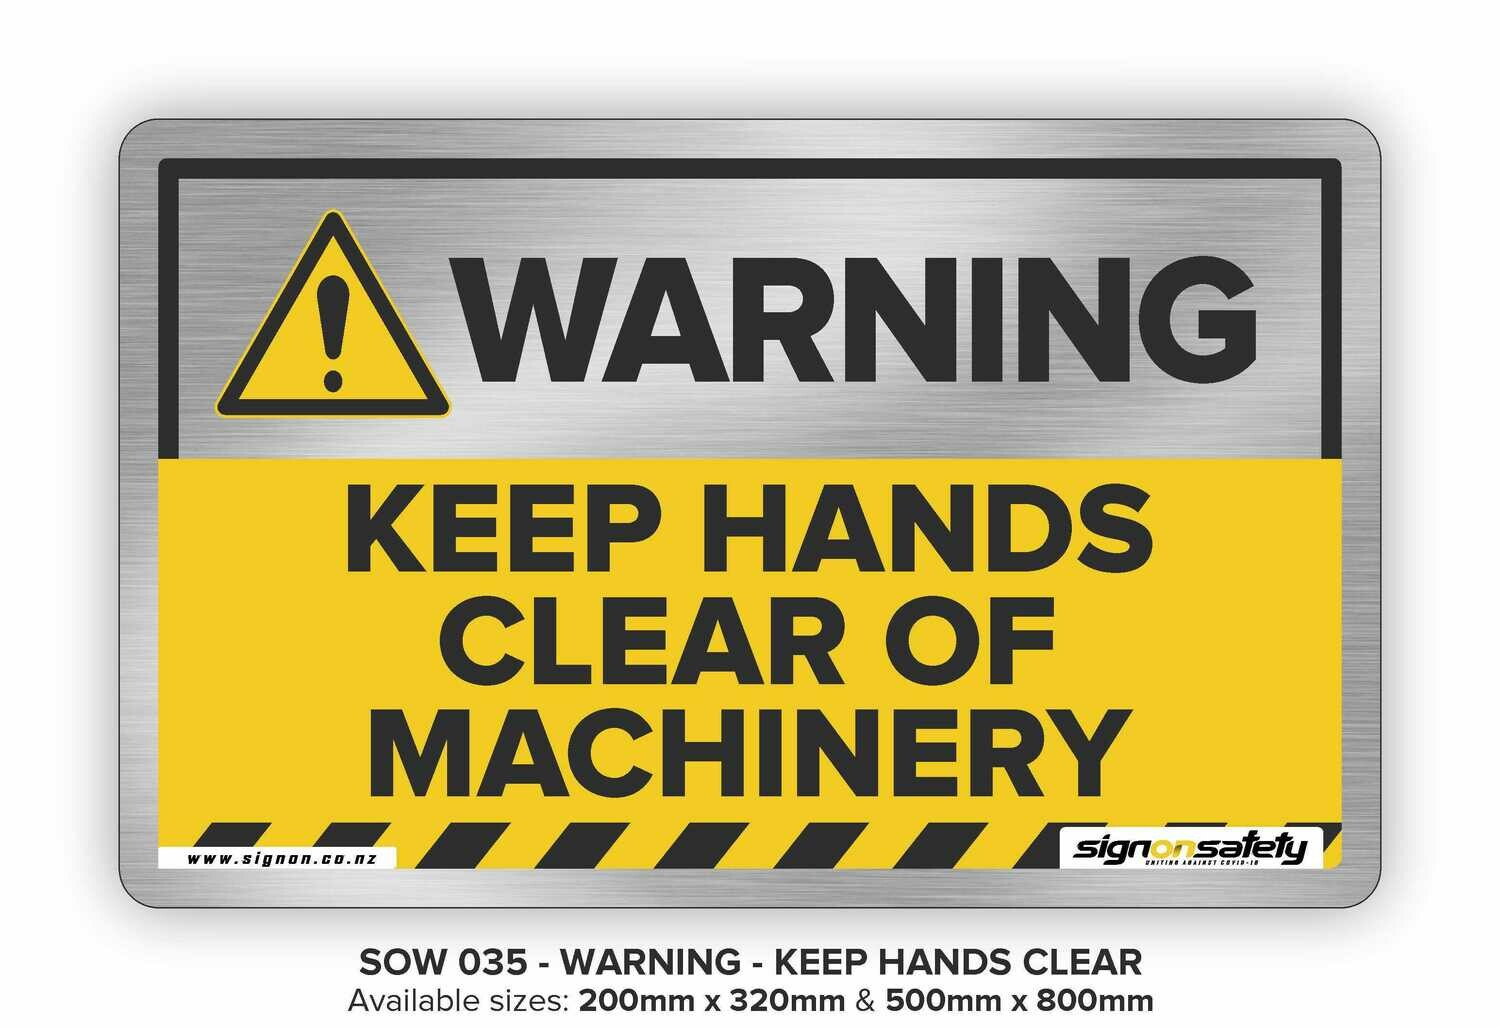 Warning - Keep Hands Clear Of Machinery